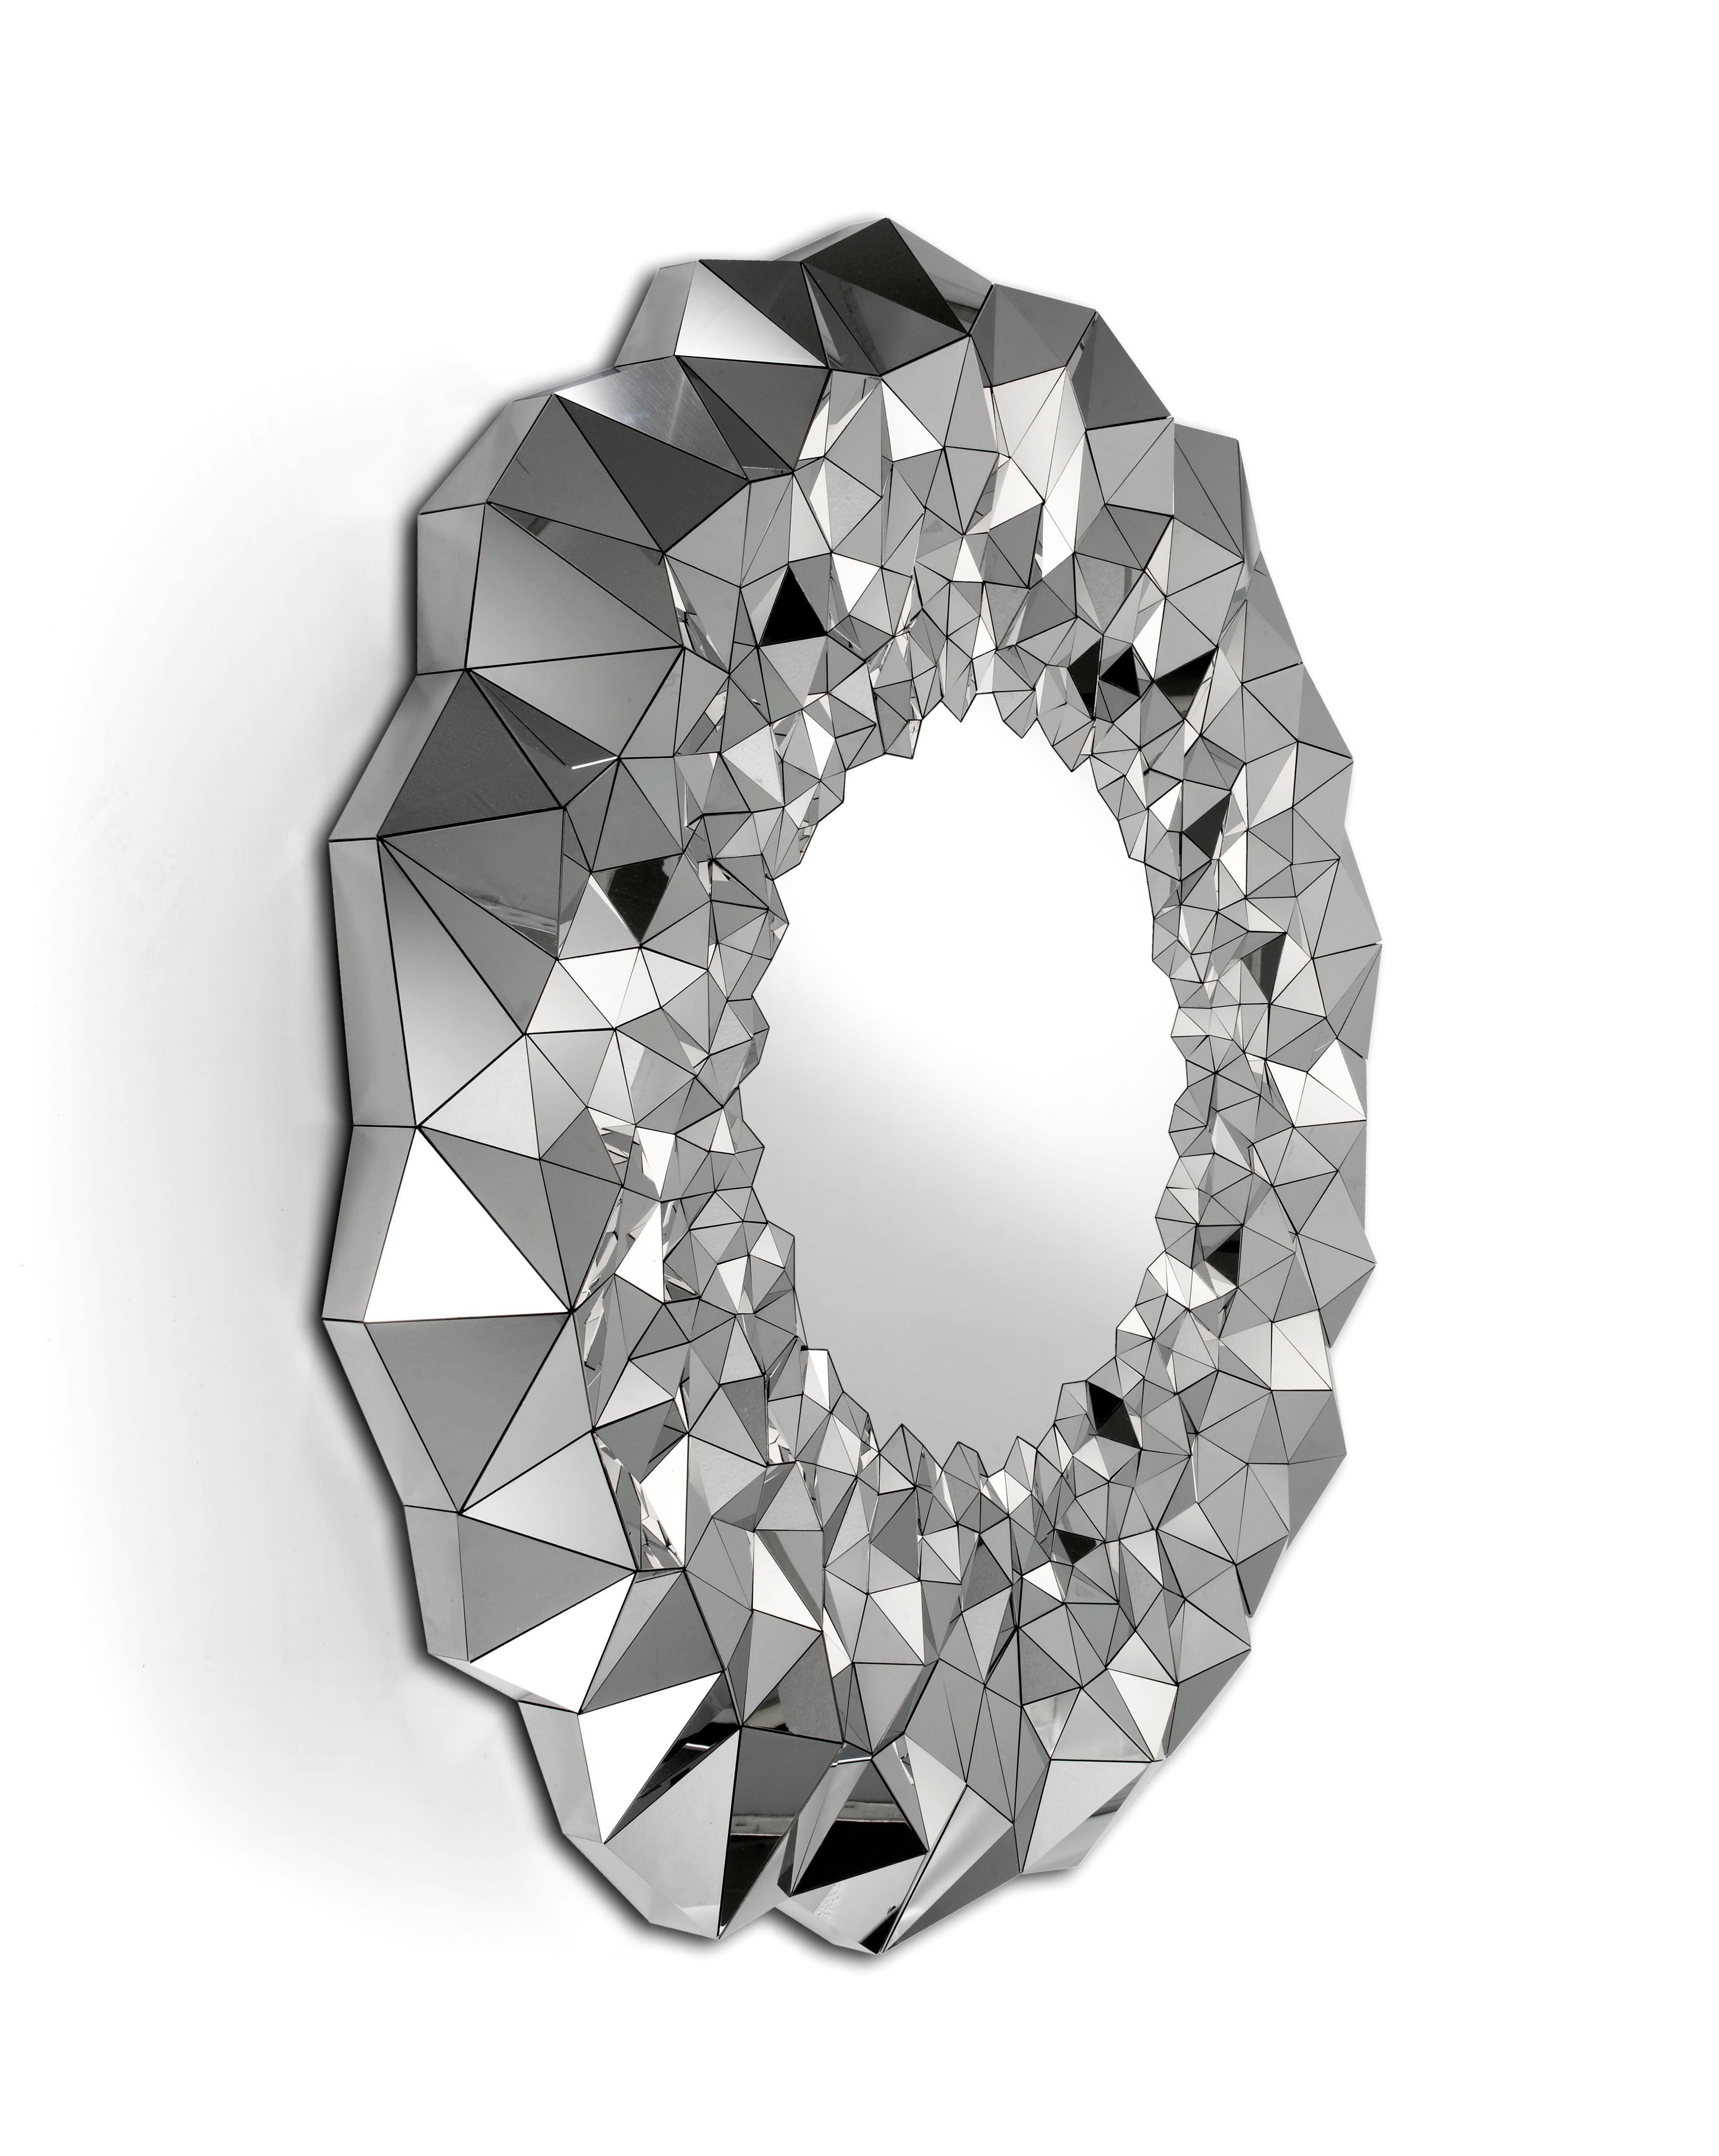 Part of the award winning stellar collection - the stellar mirror is inspired by the precious qualities of naturally forming amethyst geodes and machine cut diamonds. The large expansive center of the mirror is in stark contrast to the turbulent